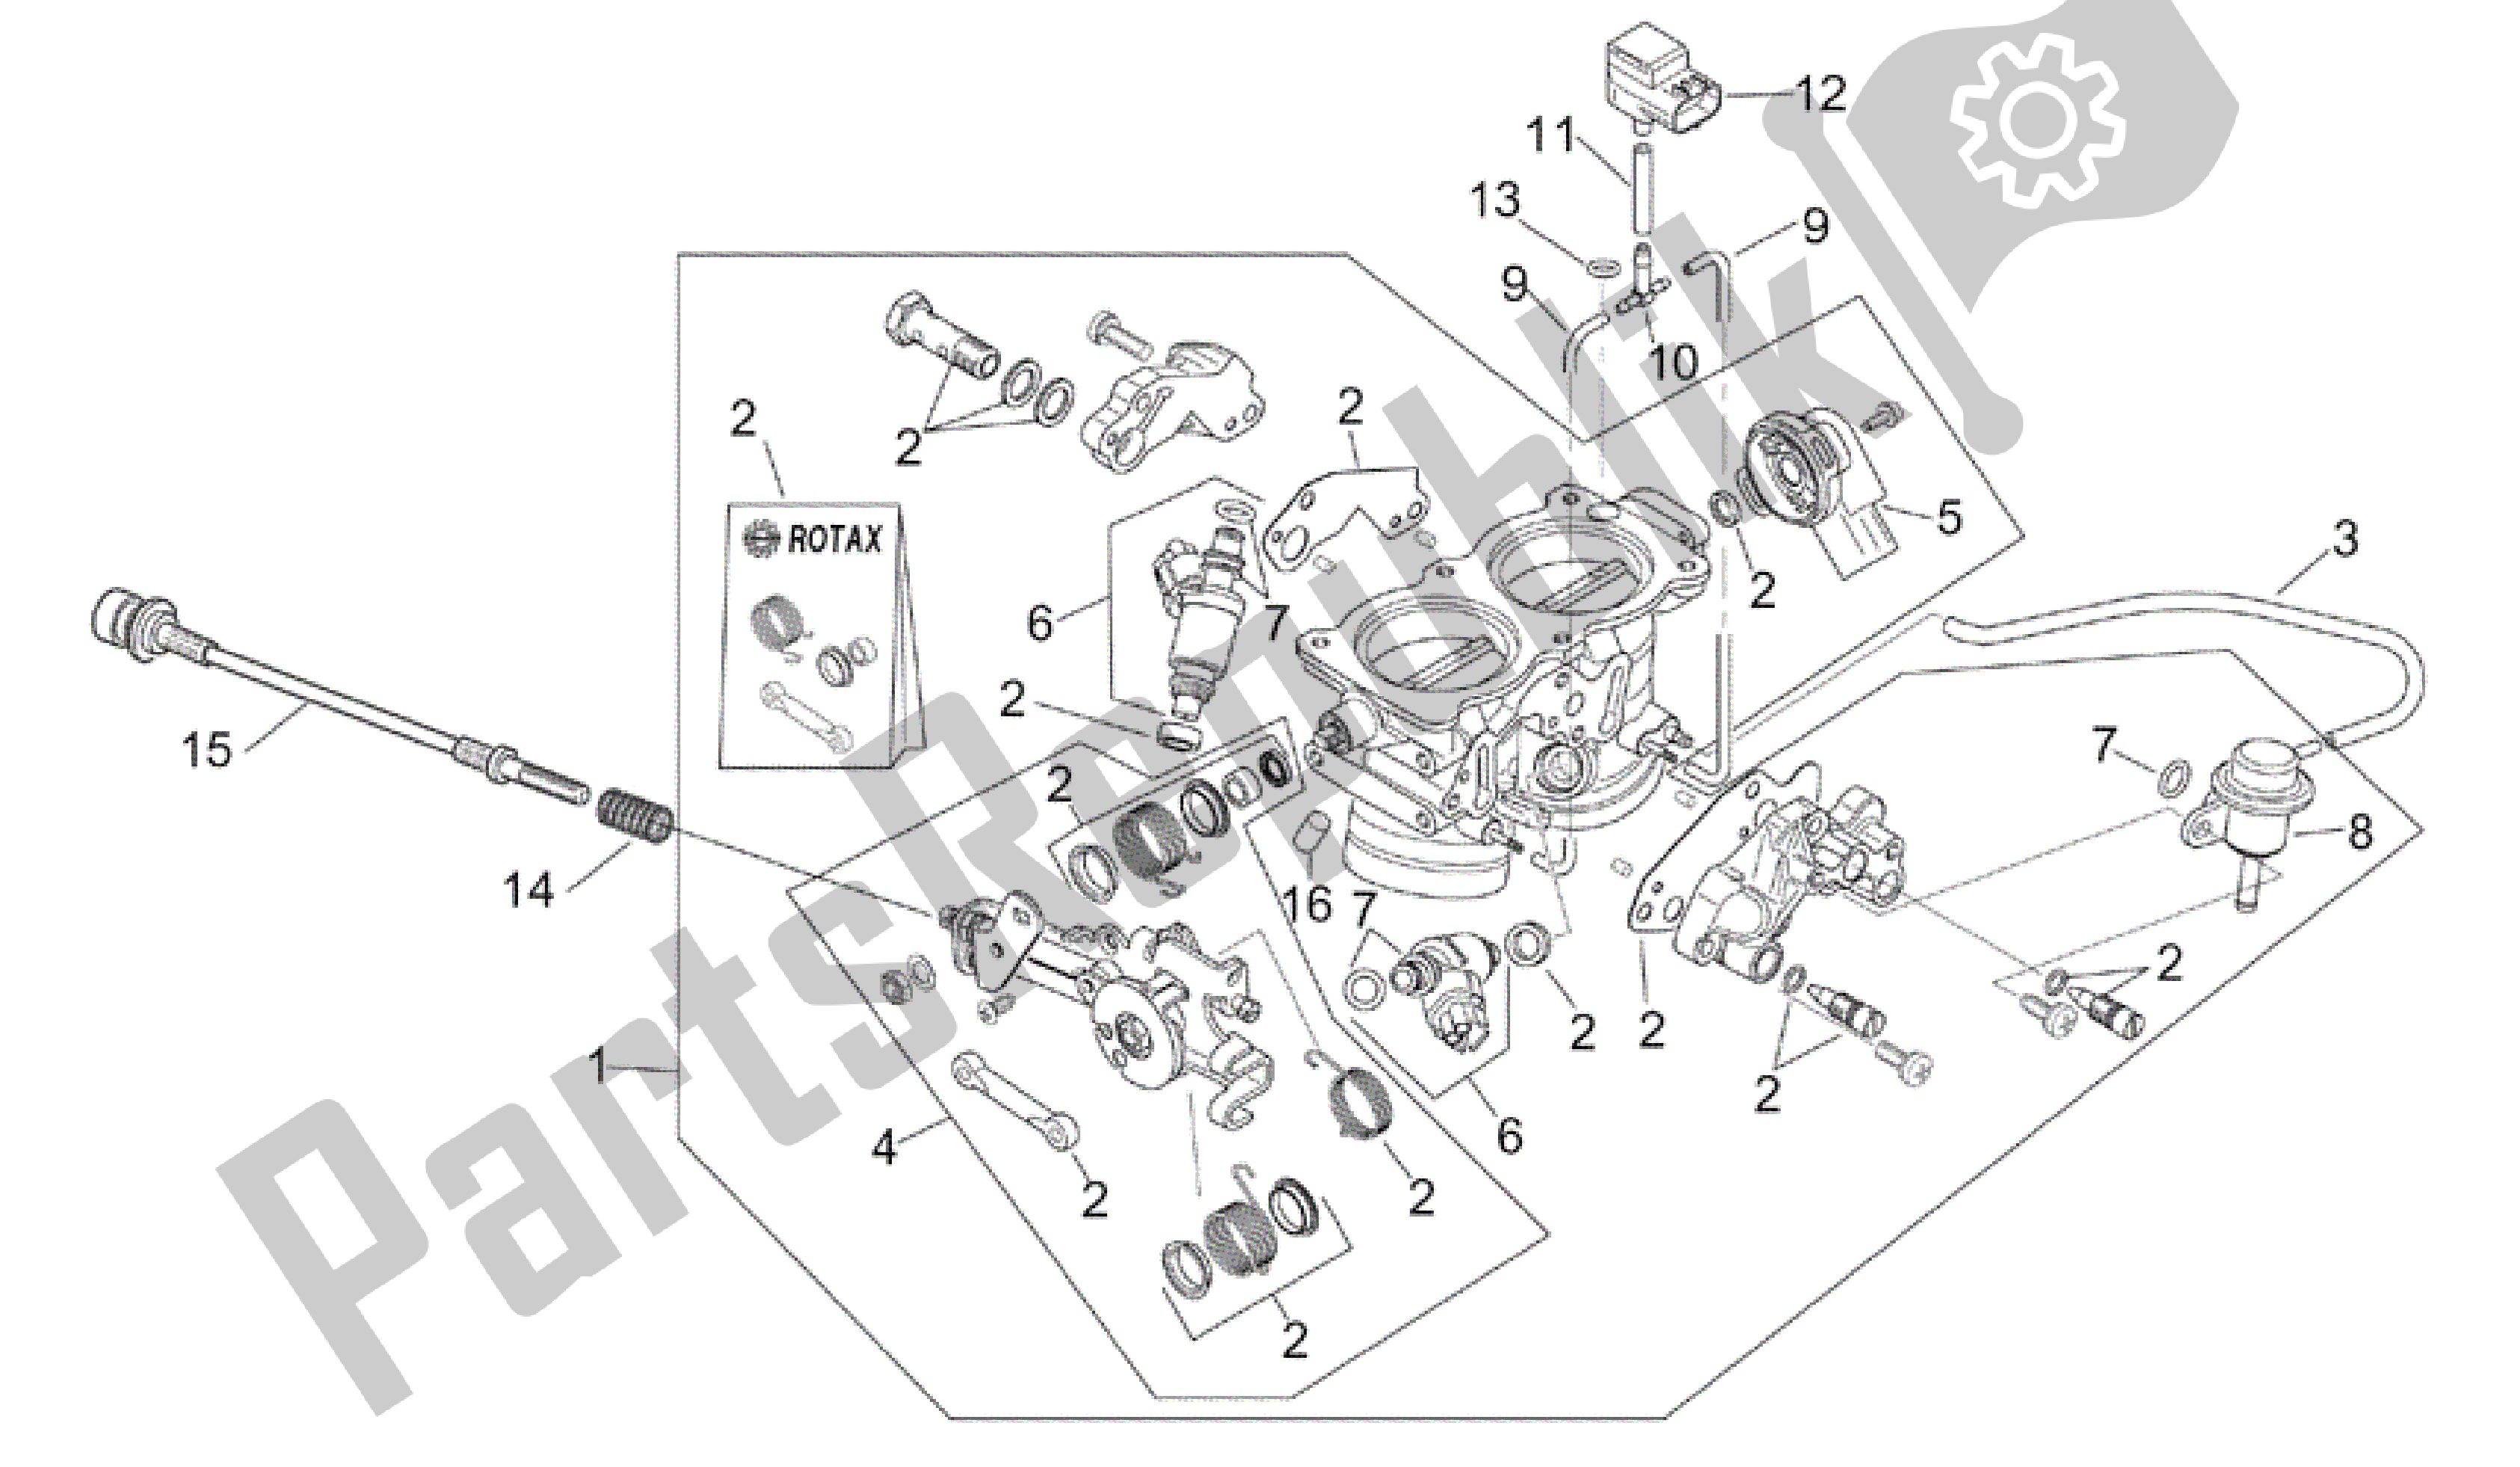 All parts for the Throttle Body of the Aprilia RSV Tuono RS 1000 2004 - 2005